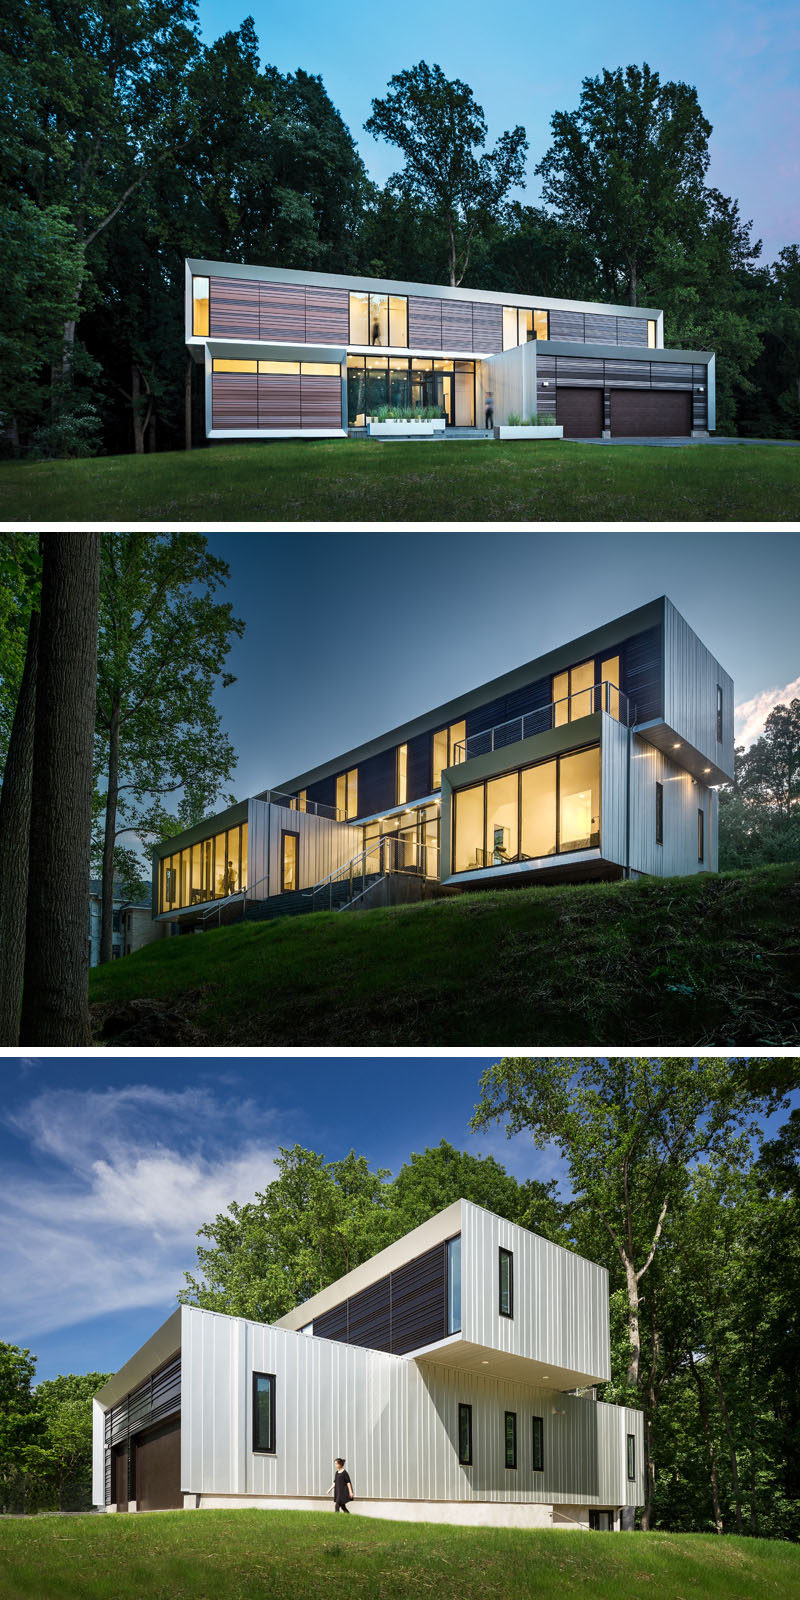 Höweler+Yoon Architecture have designed the Bridge House, a multi-generational family home in McLean, Virginia, that sits between a suburban development and a protected wooded area. #Architecture #ModernHouse